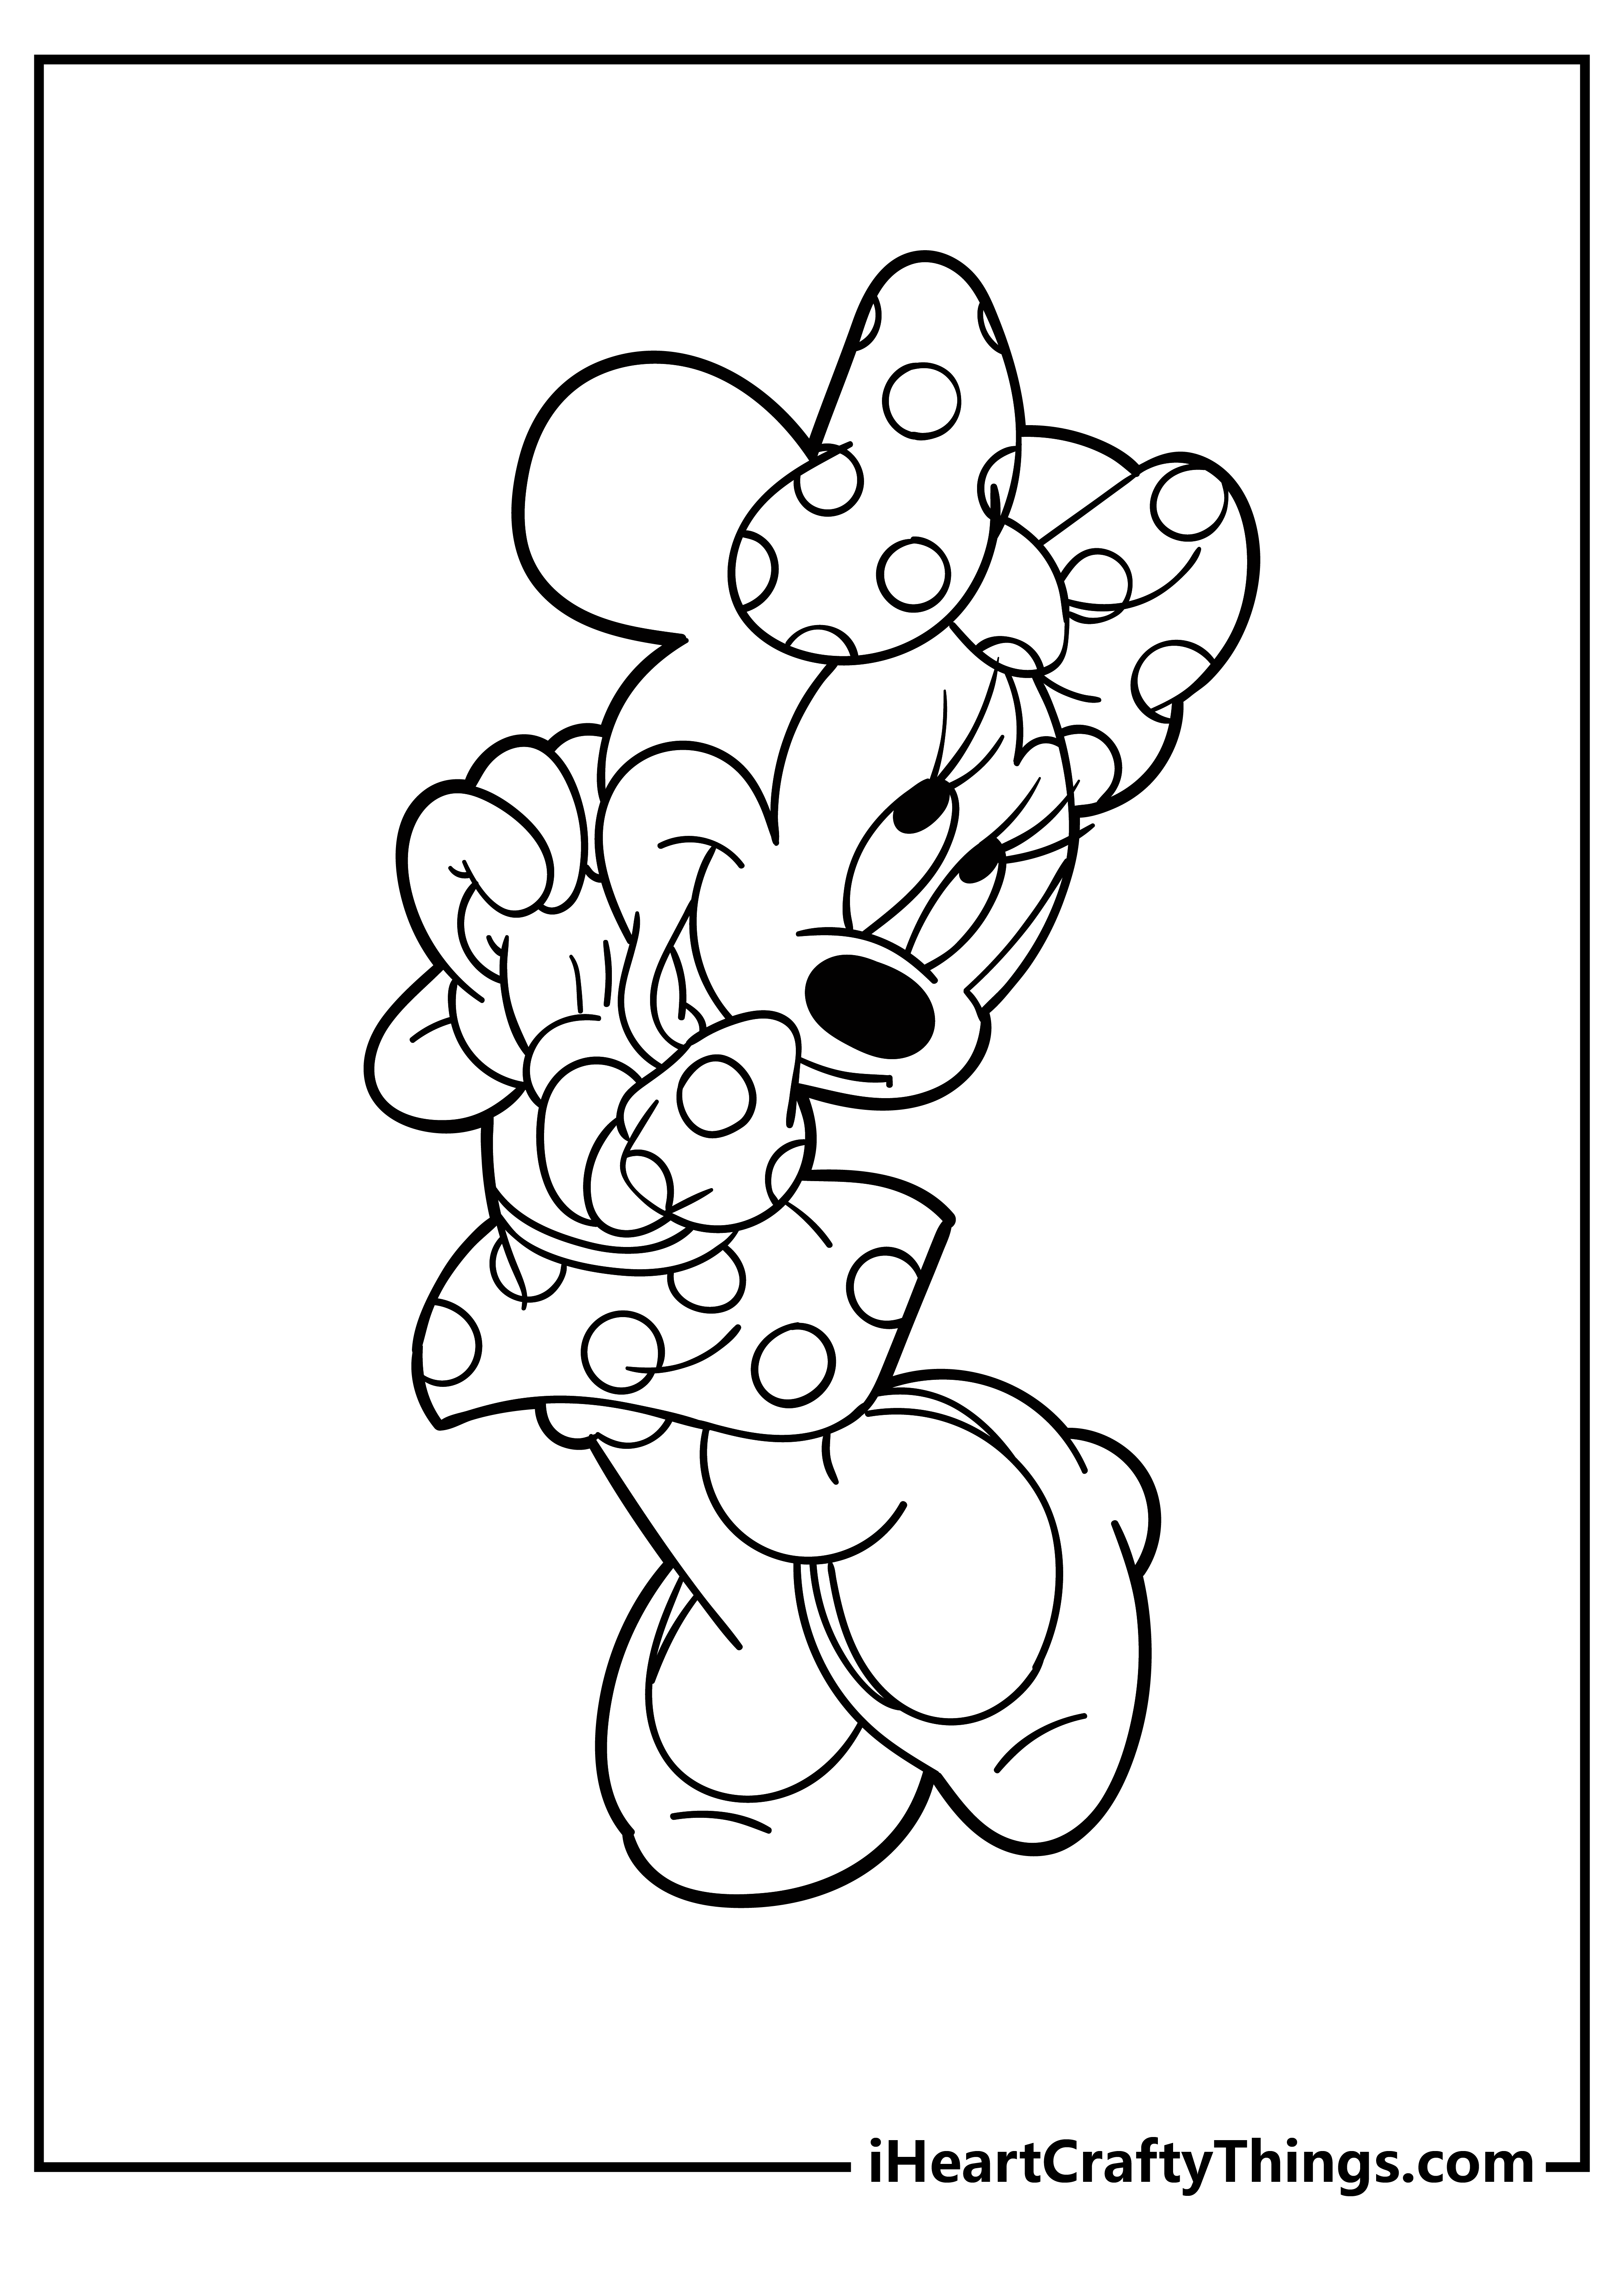 Minnie Mouse Coloring Pages for adults free printable